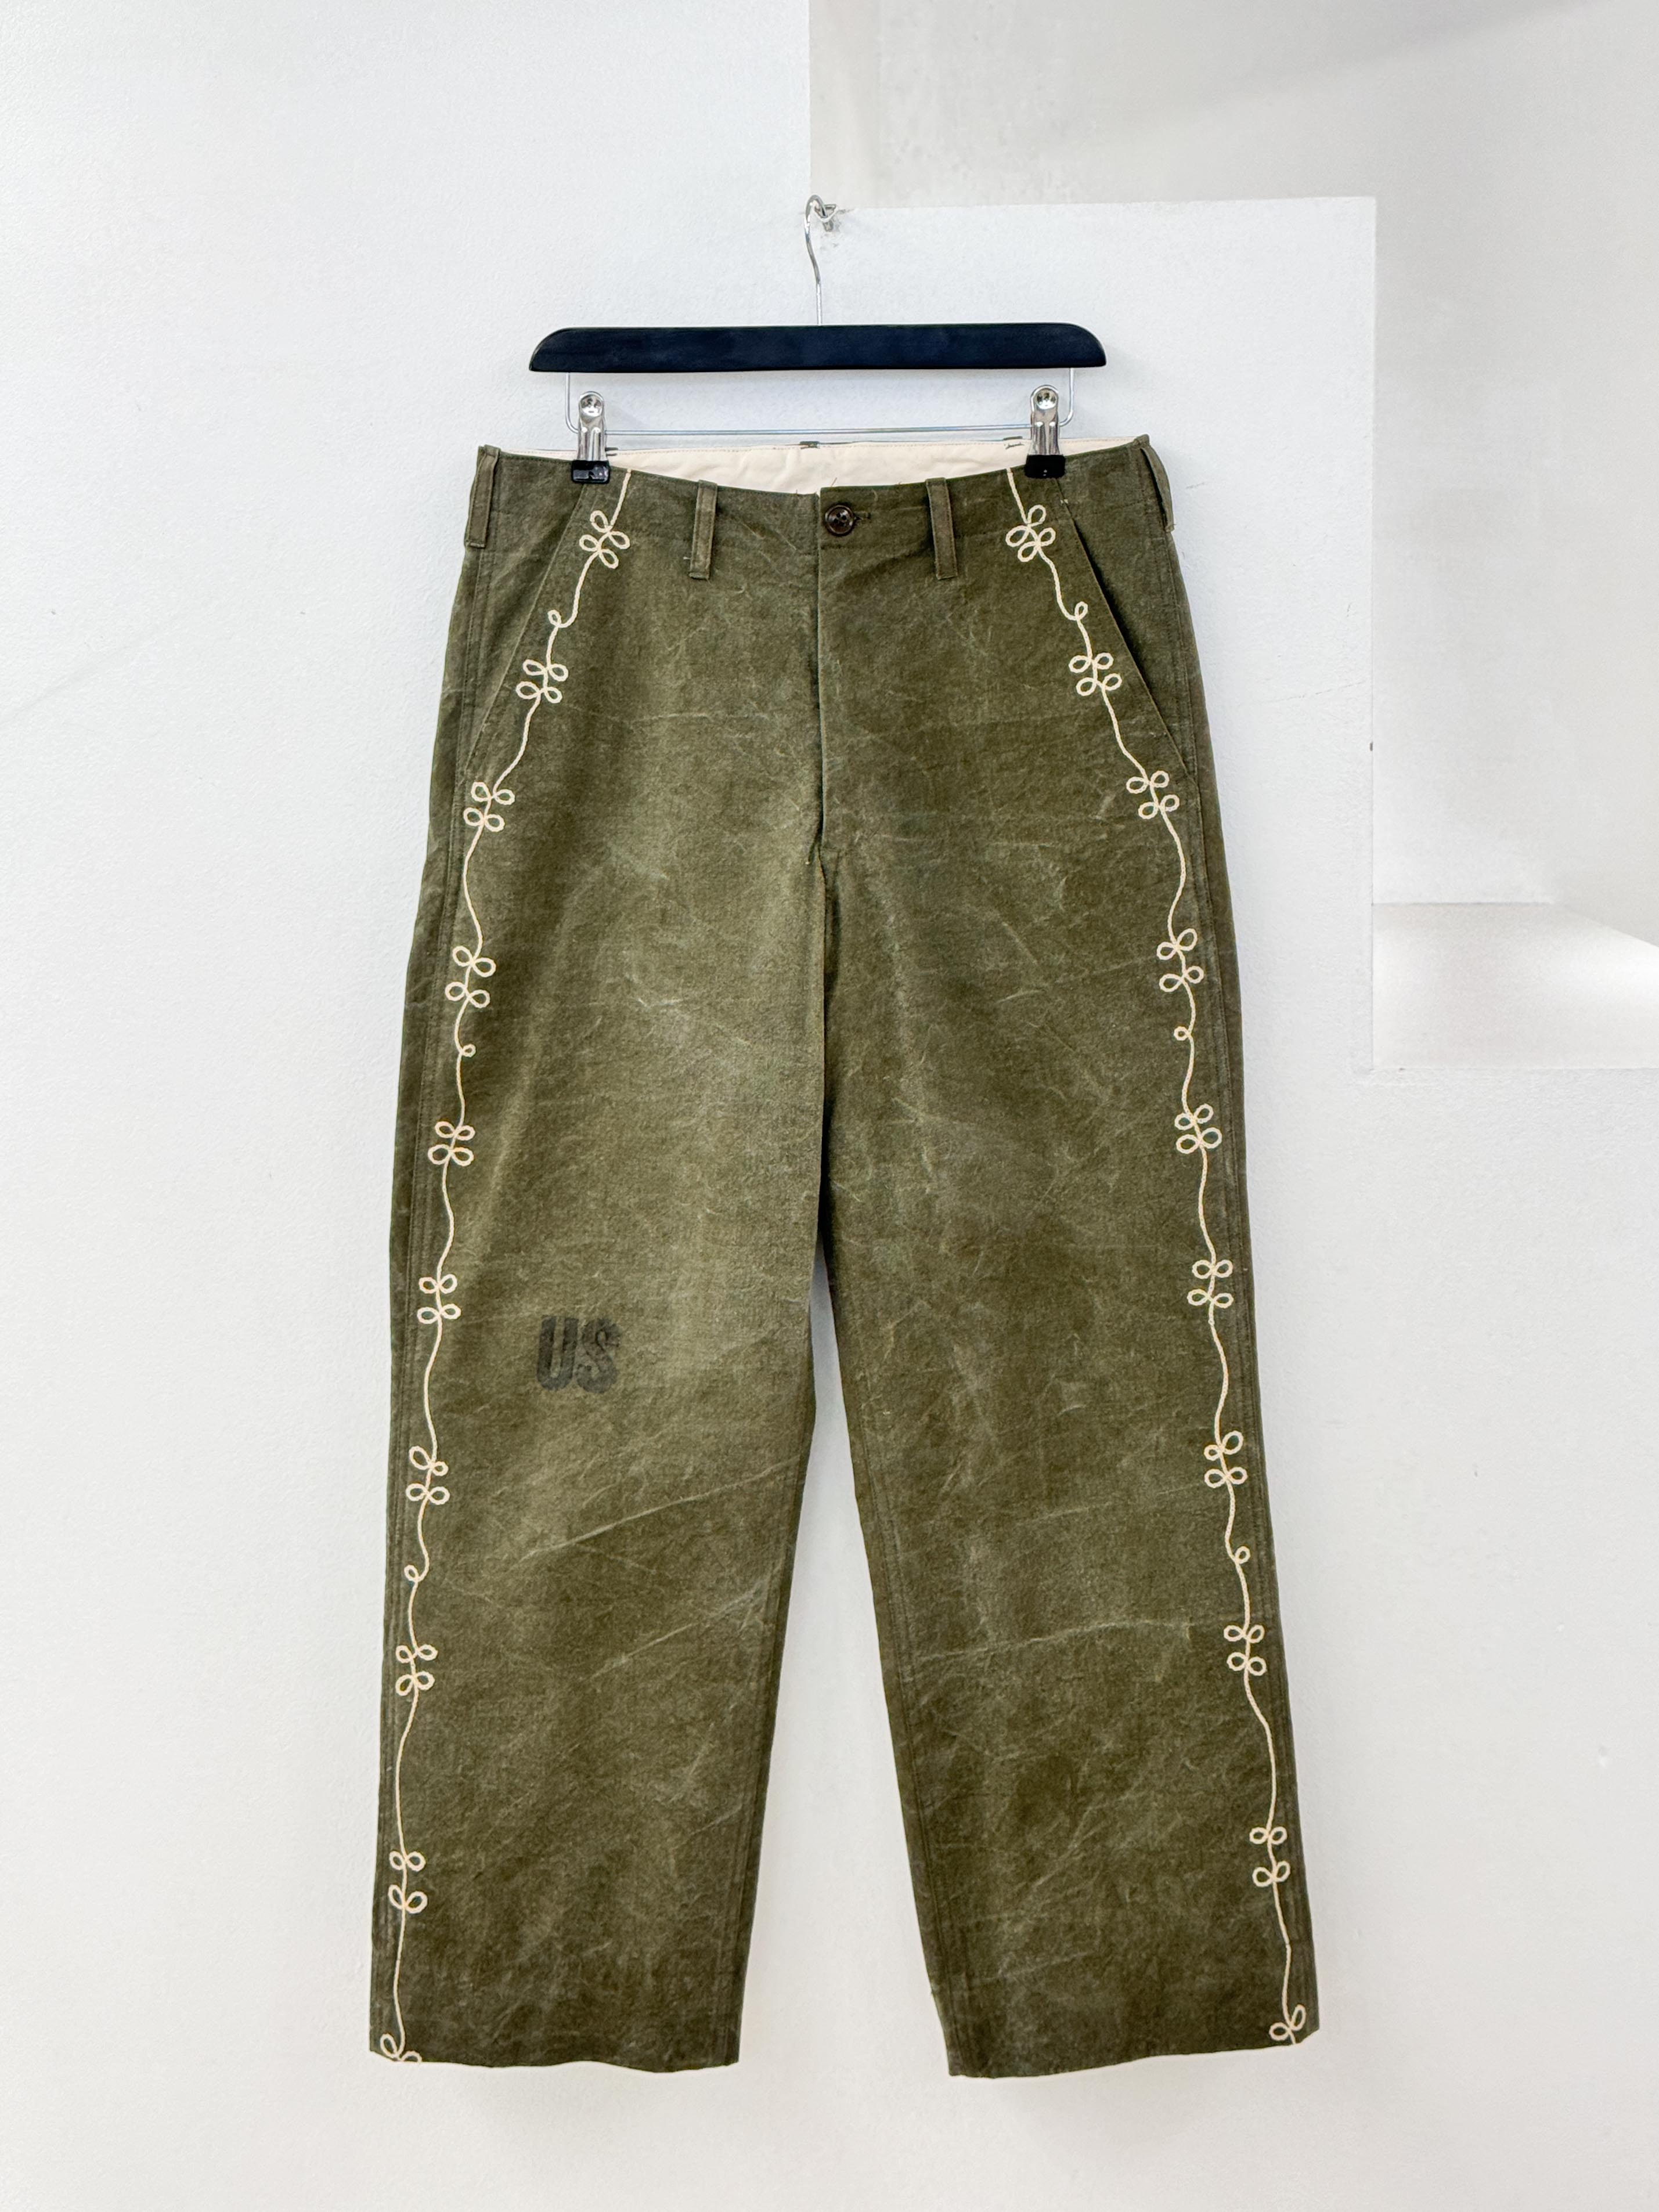 Ink military remake pants 32inch